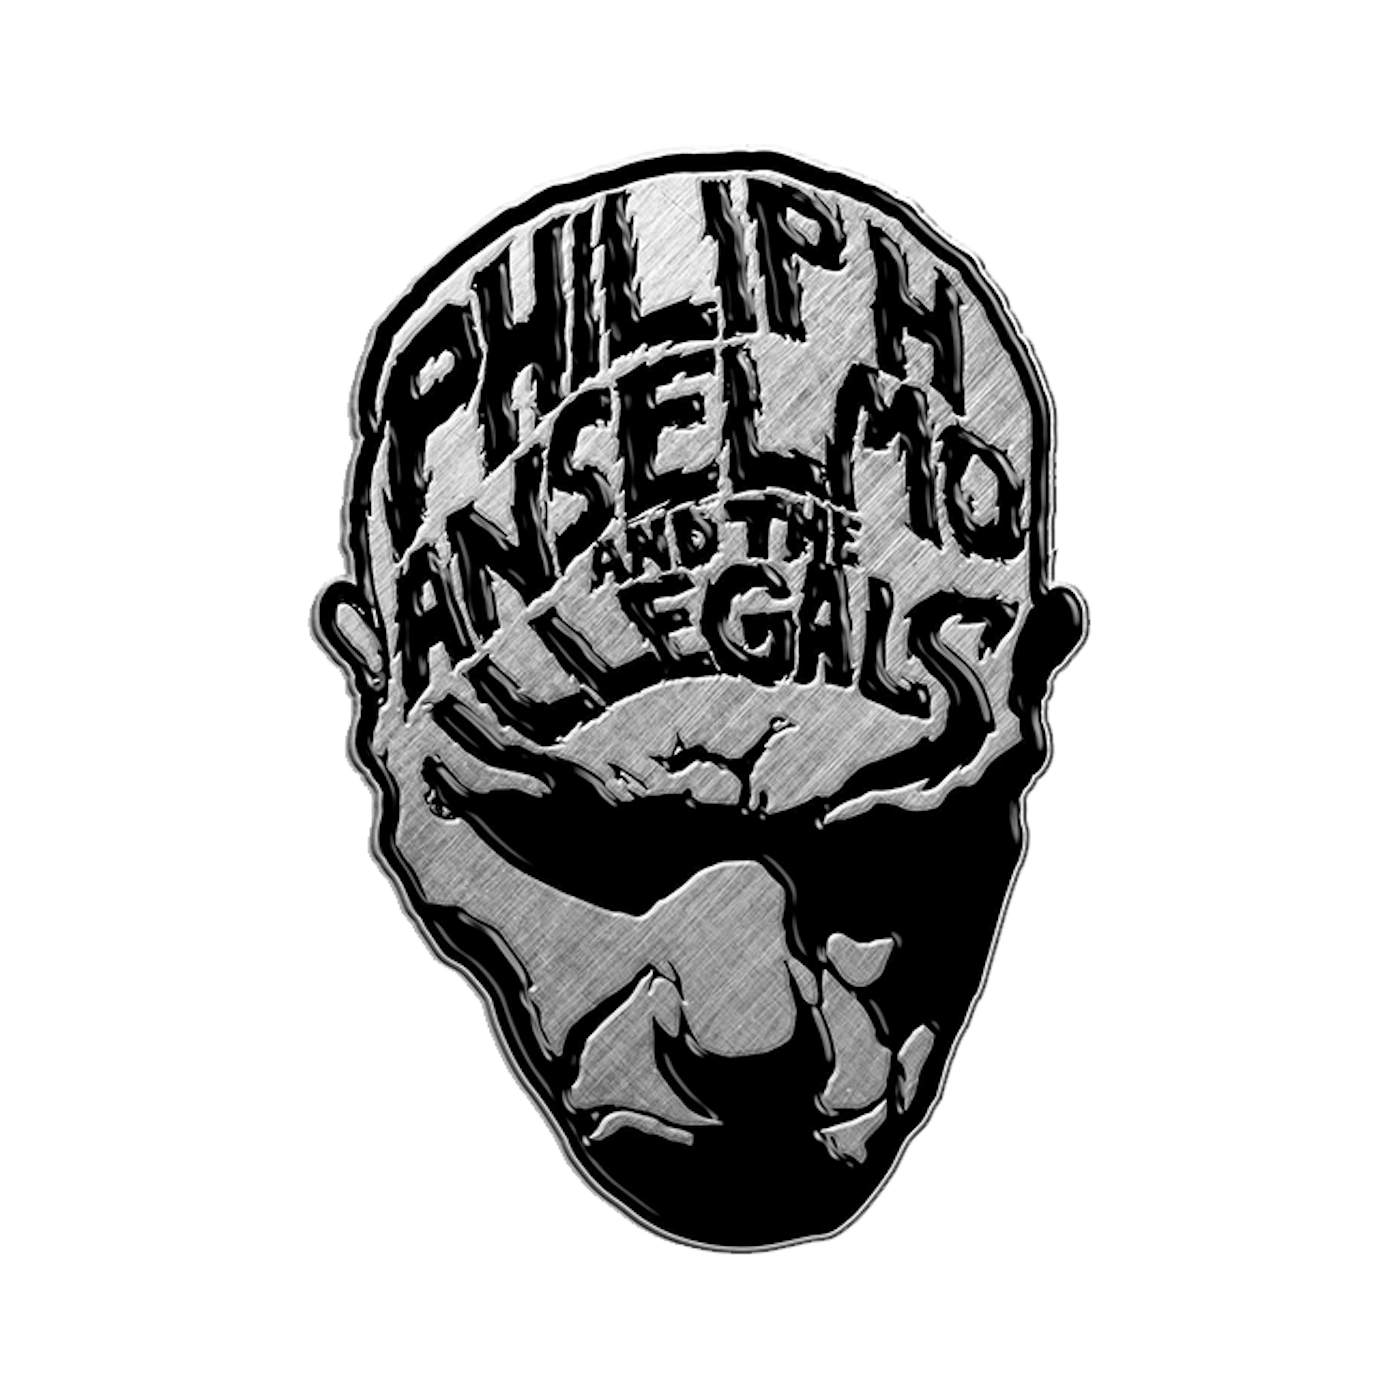 Philip H. Anselmo and The Illegals - 'Face' Metal Pin